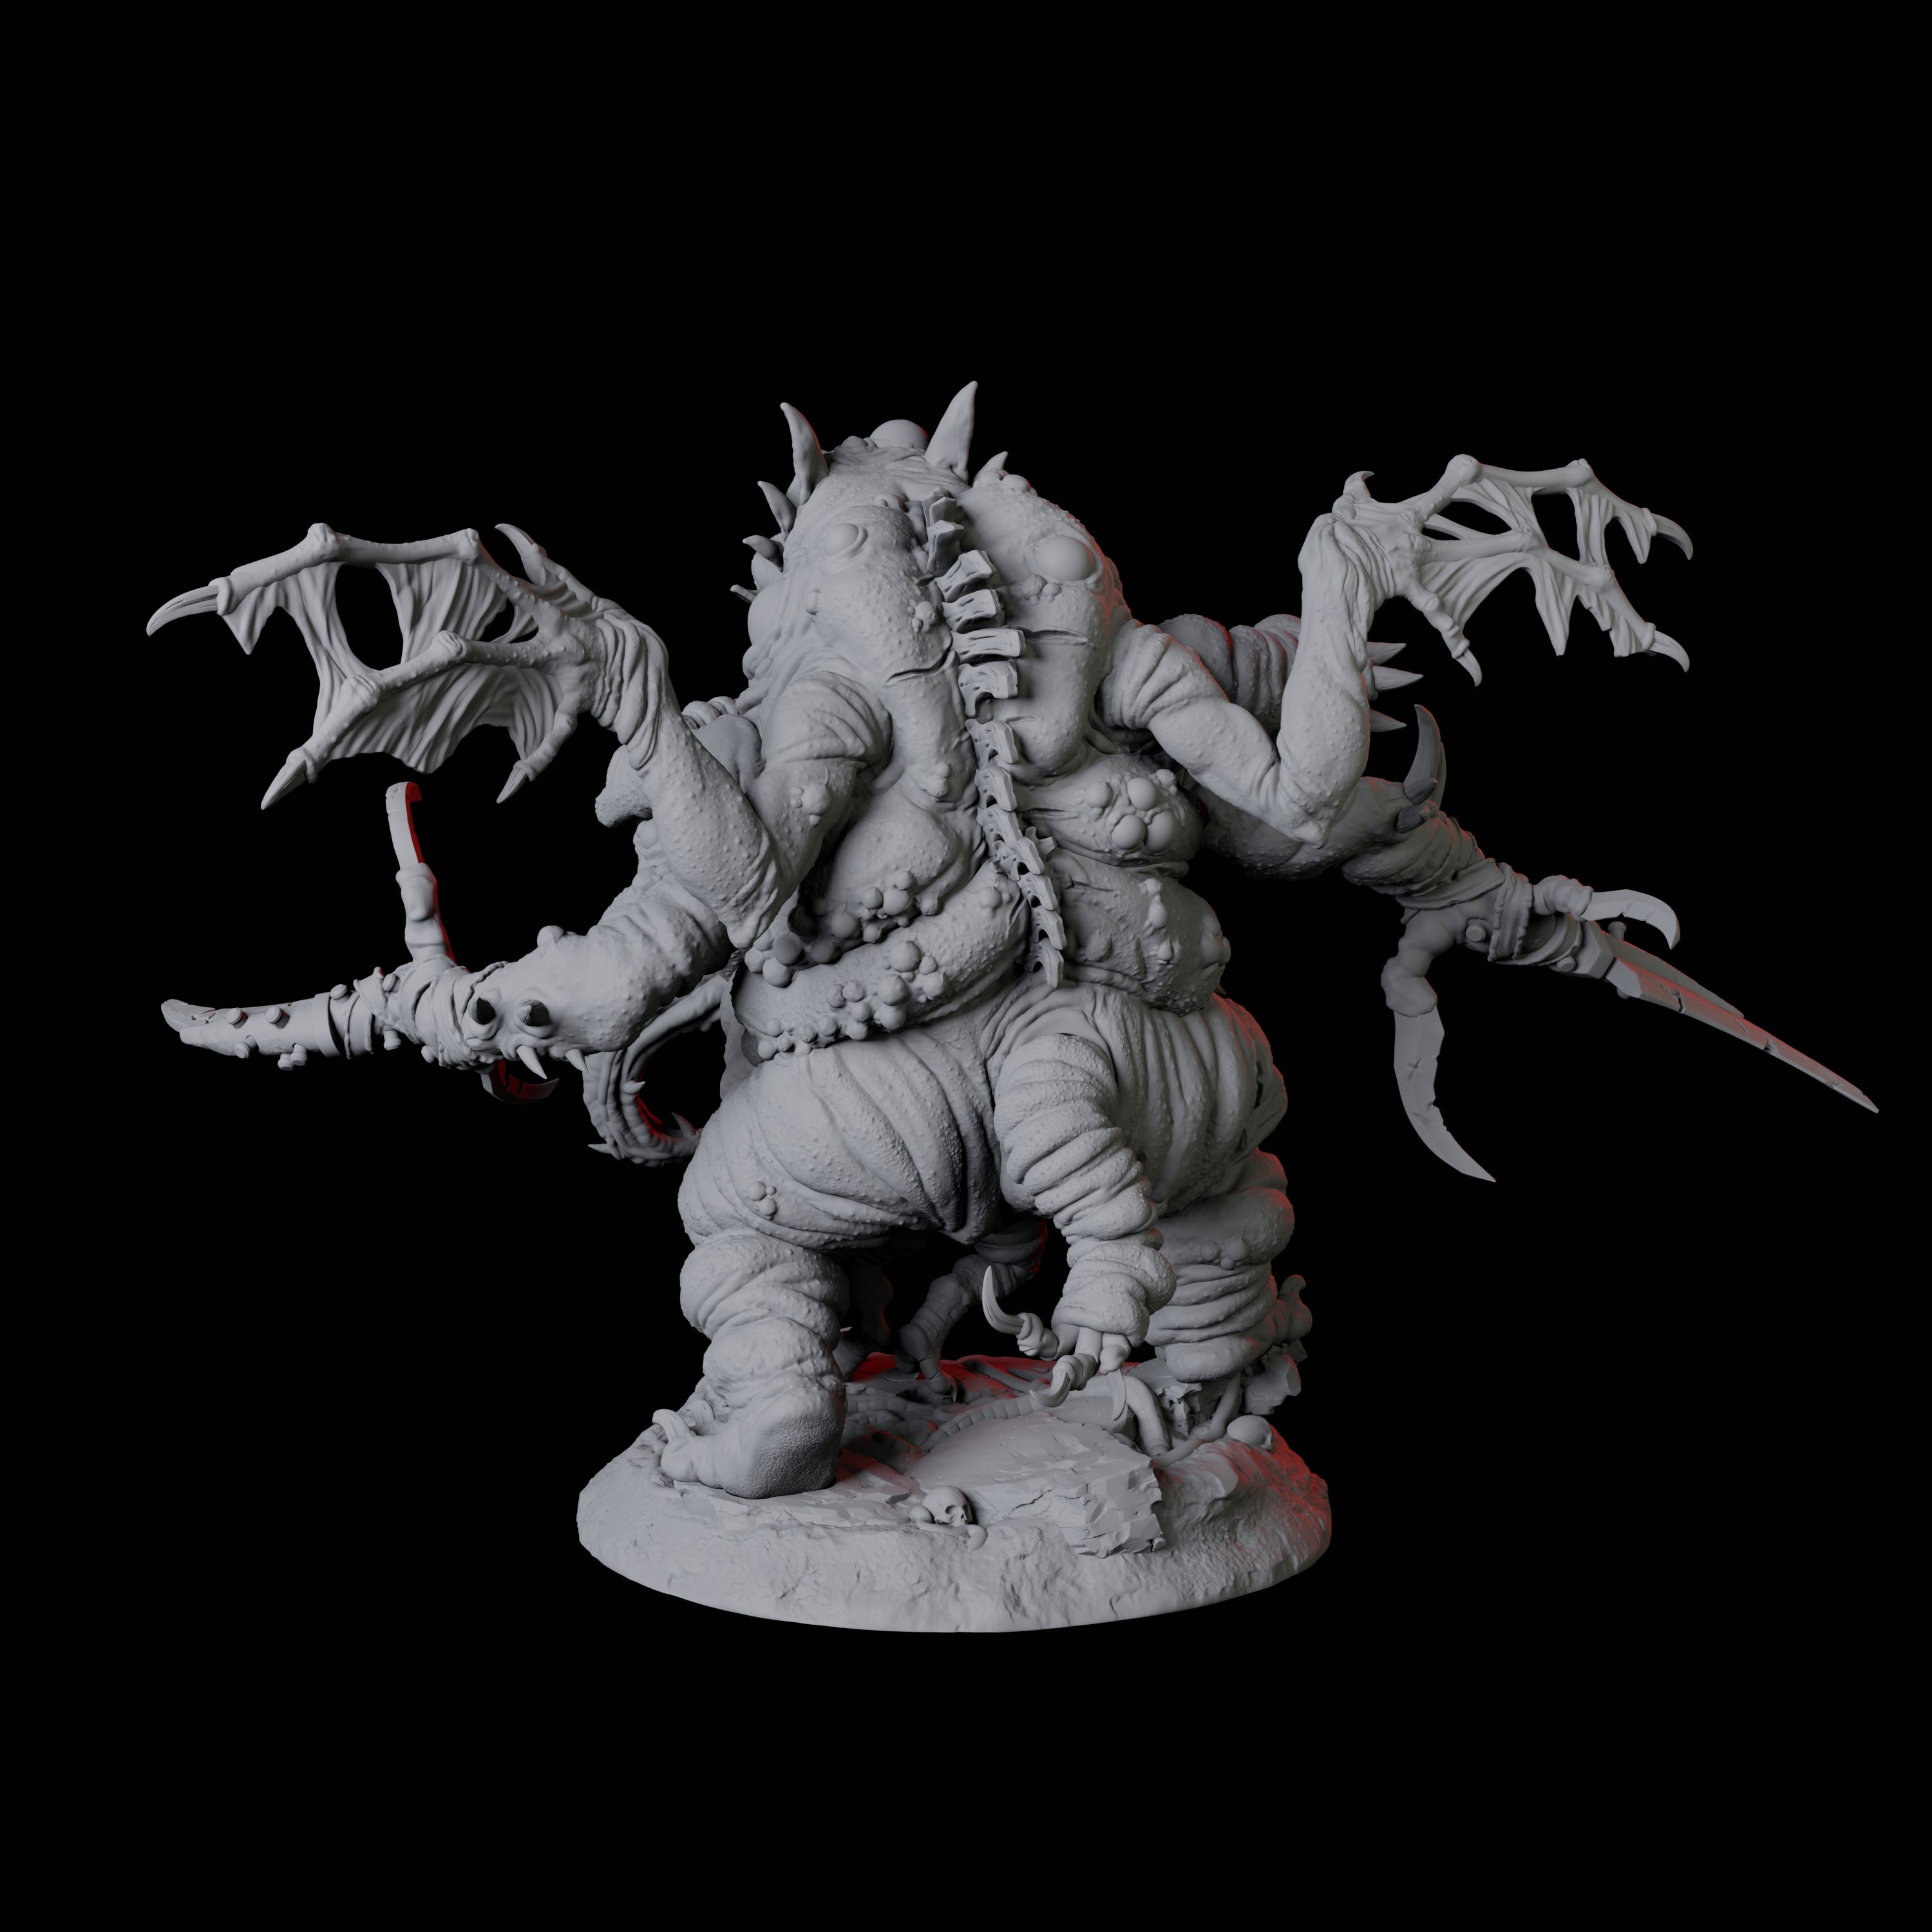 Fleshwarped Irnakurse C Miniature for Dungeons and Dragons, Pathfinder or other TTRPGs